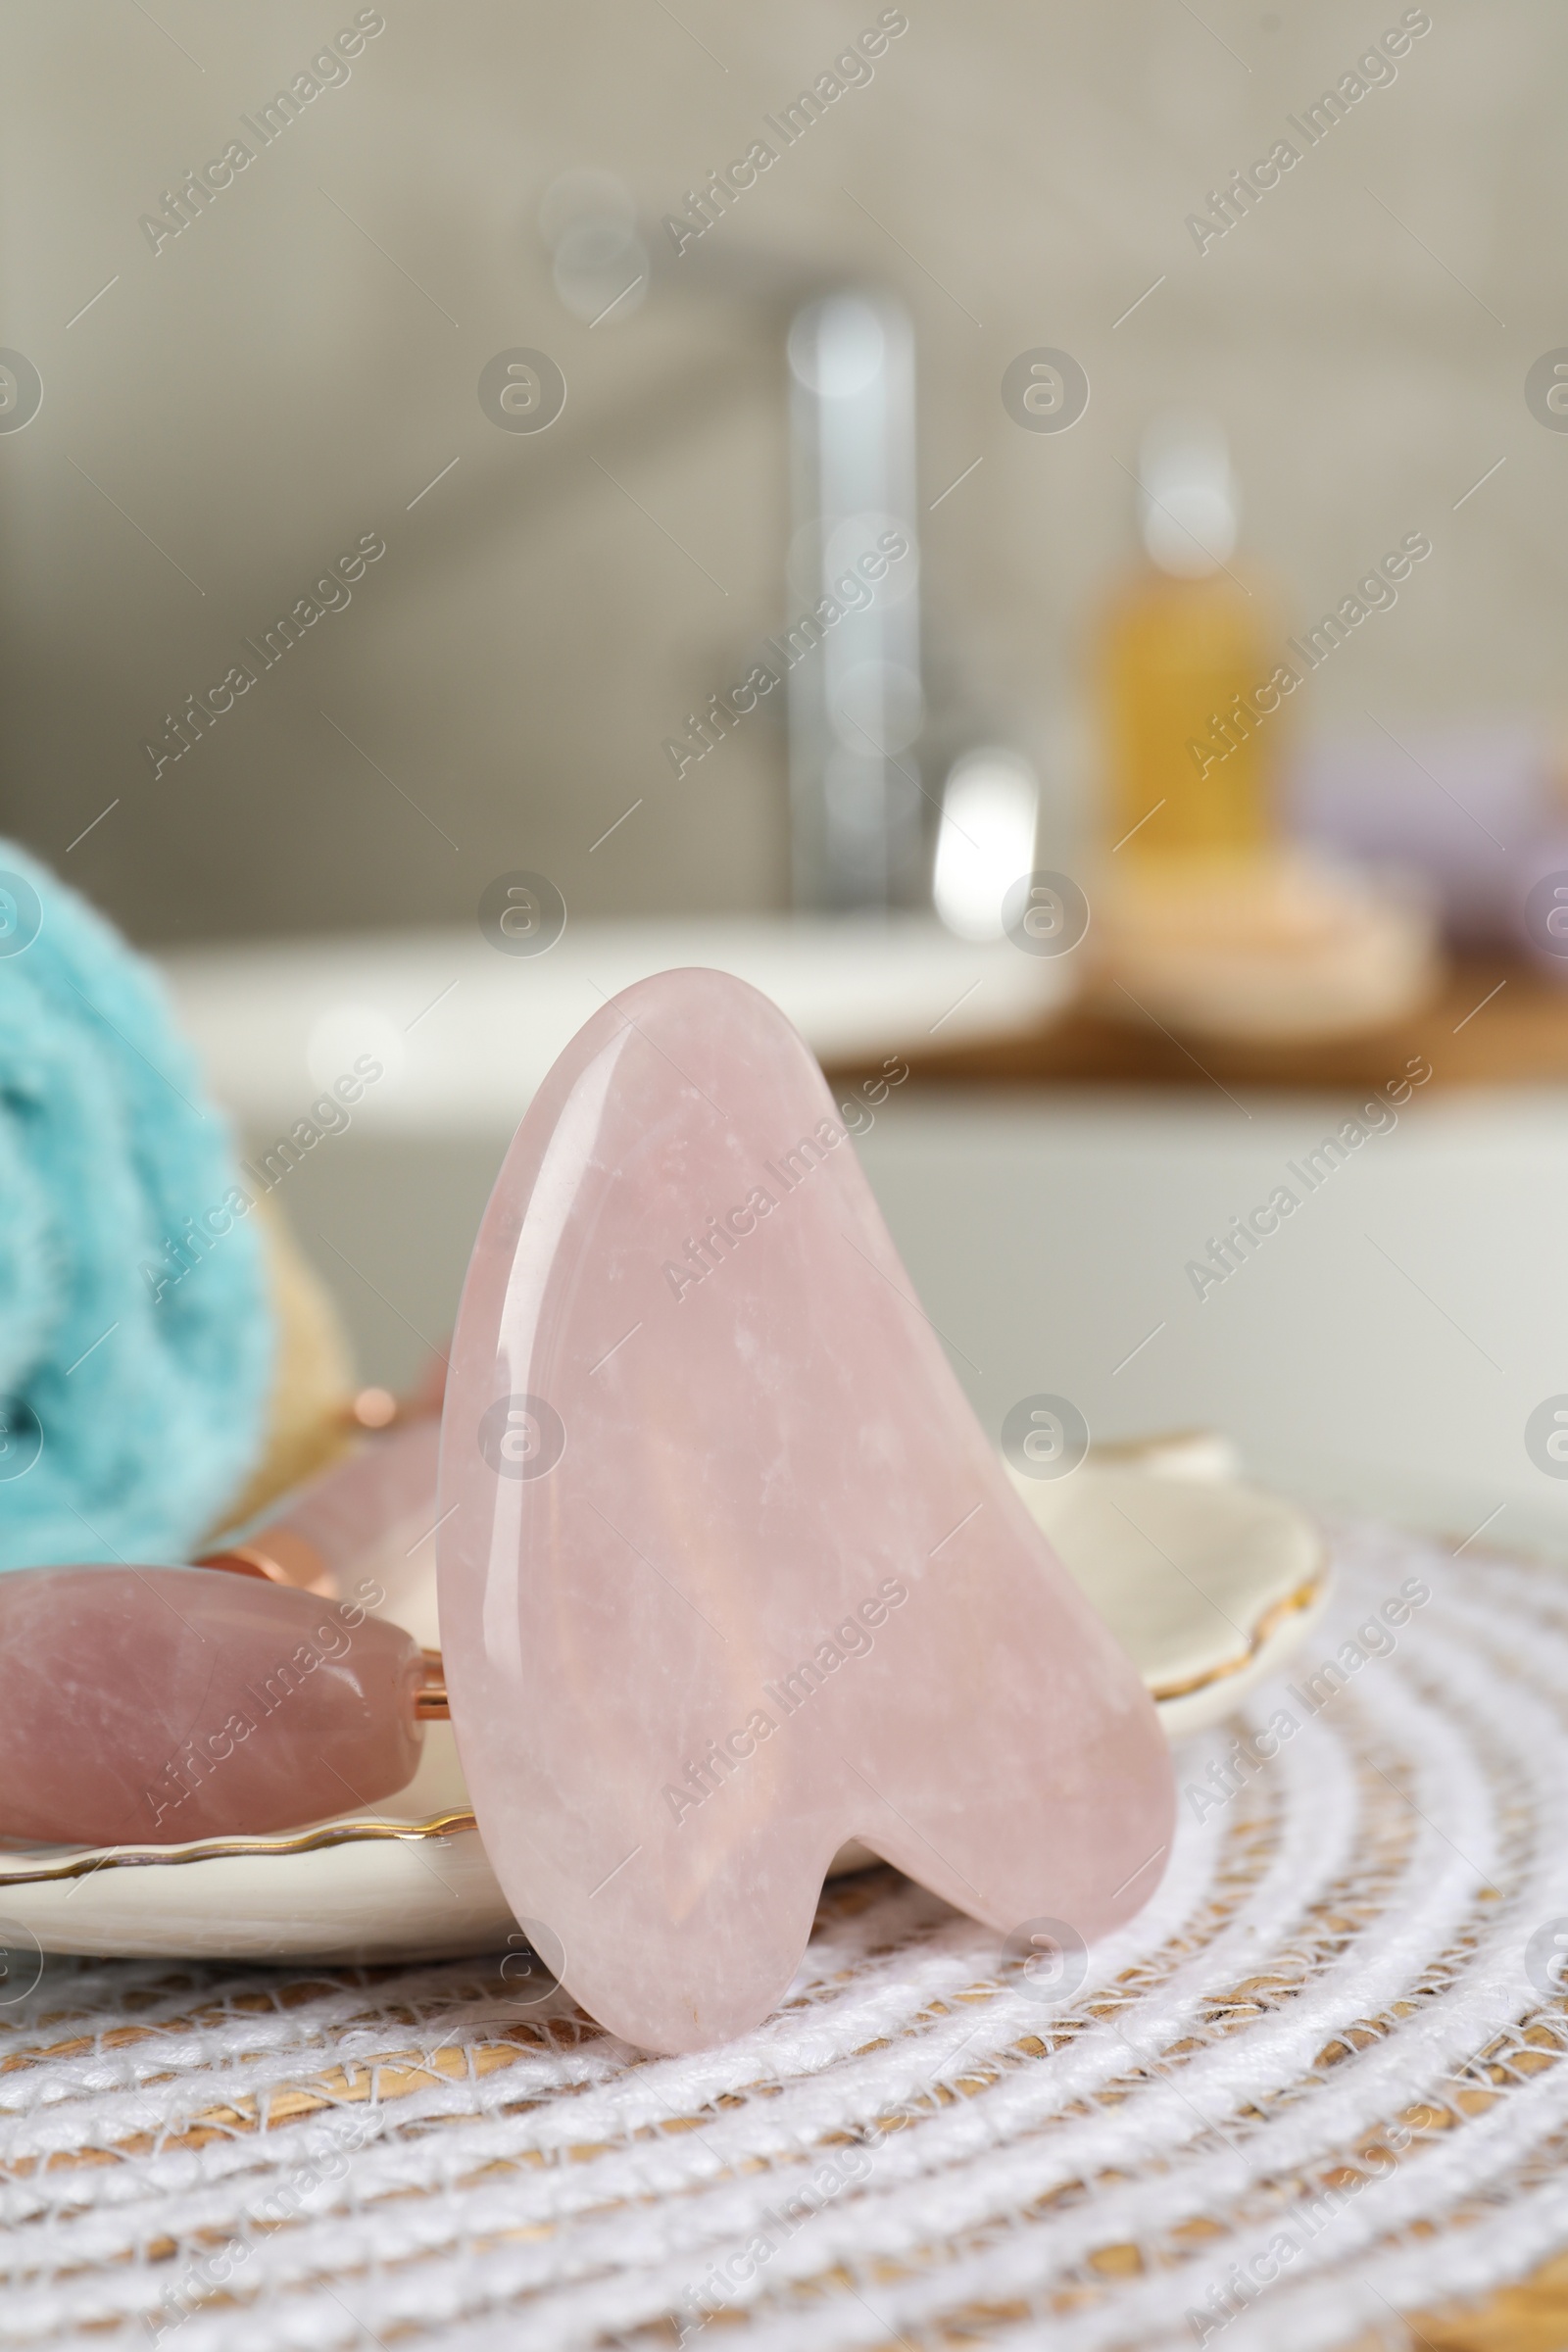 Photo of Rose quartz gua sha tool and natural face roller on table in bathroom, closeup